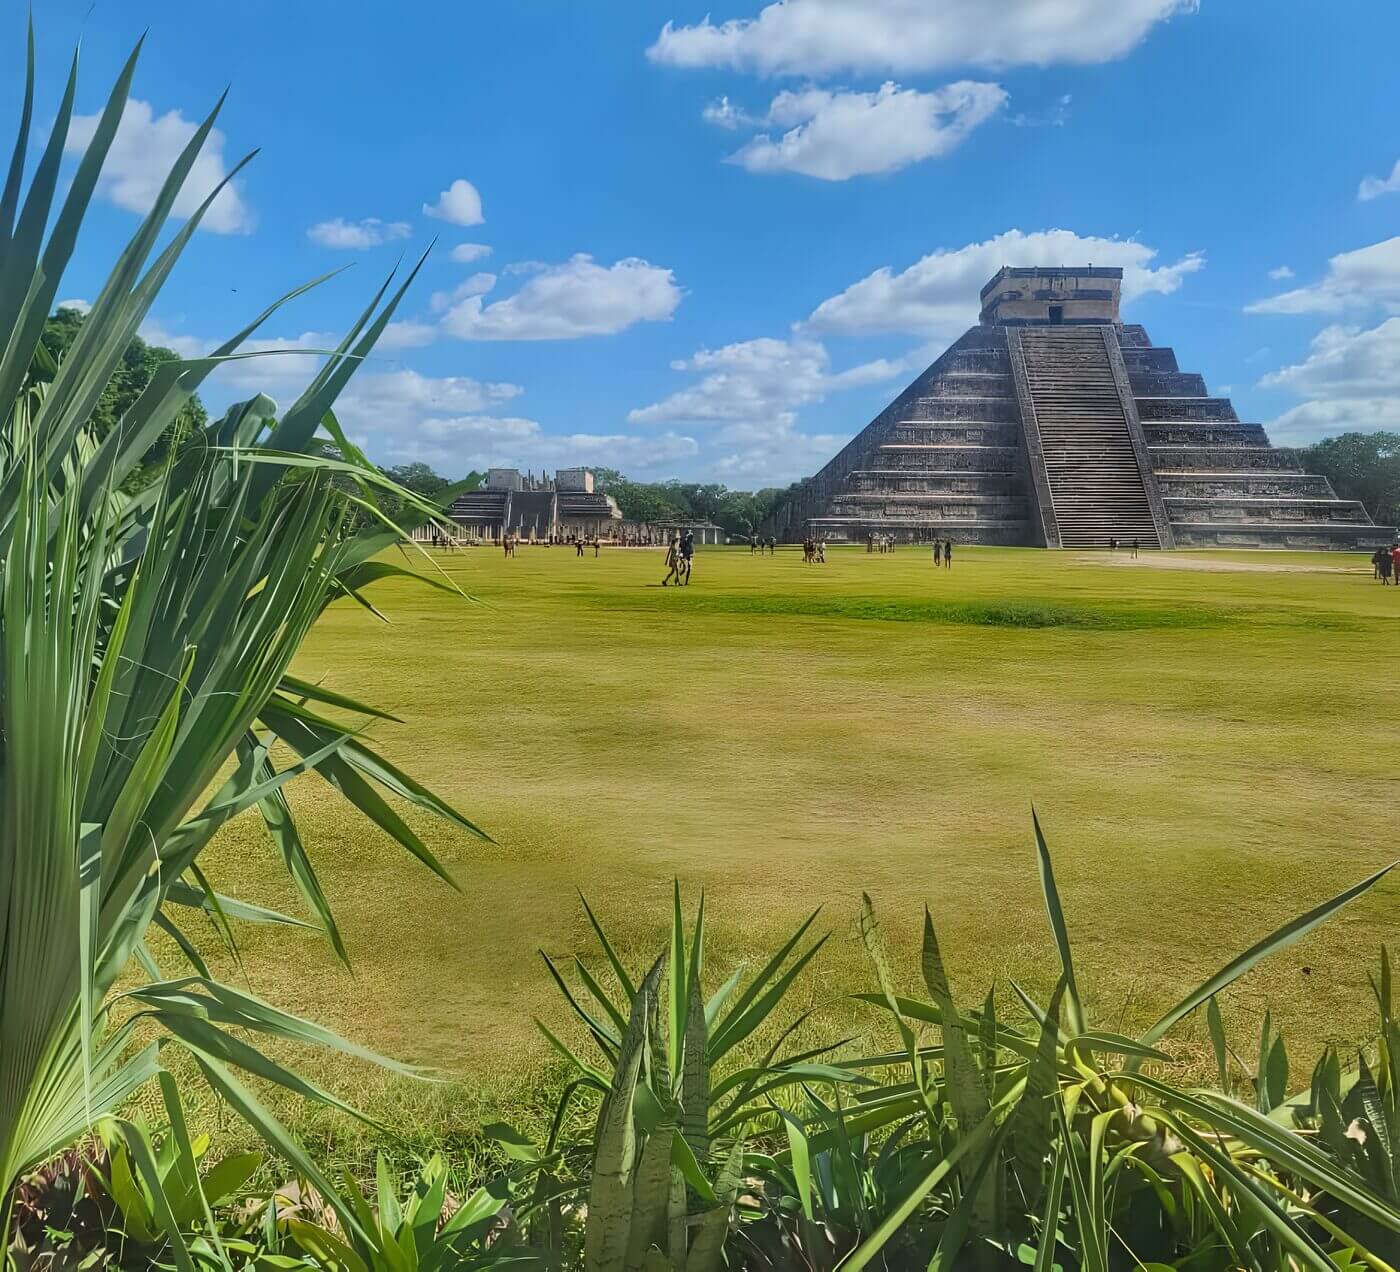 A scenic view of El Castillo, the Temple of Kukulcan, at Chichen Itza with a bright blue sky and tourists exploring the grounds, framed by lush green foliage in the foreground.